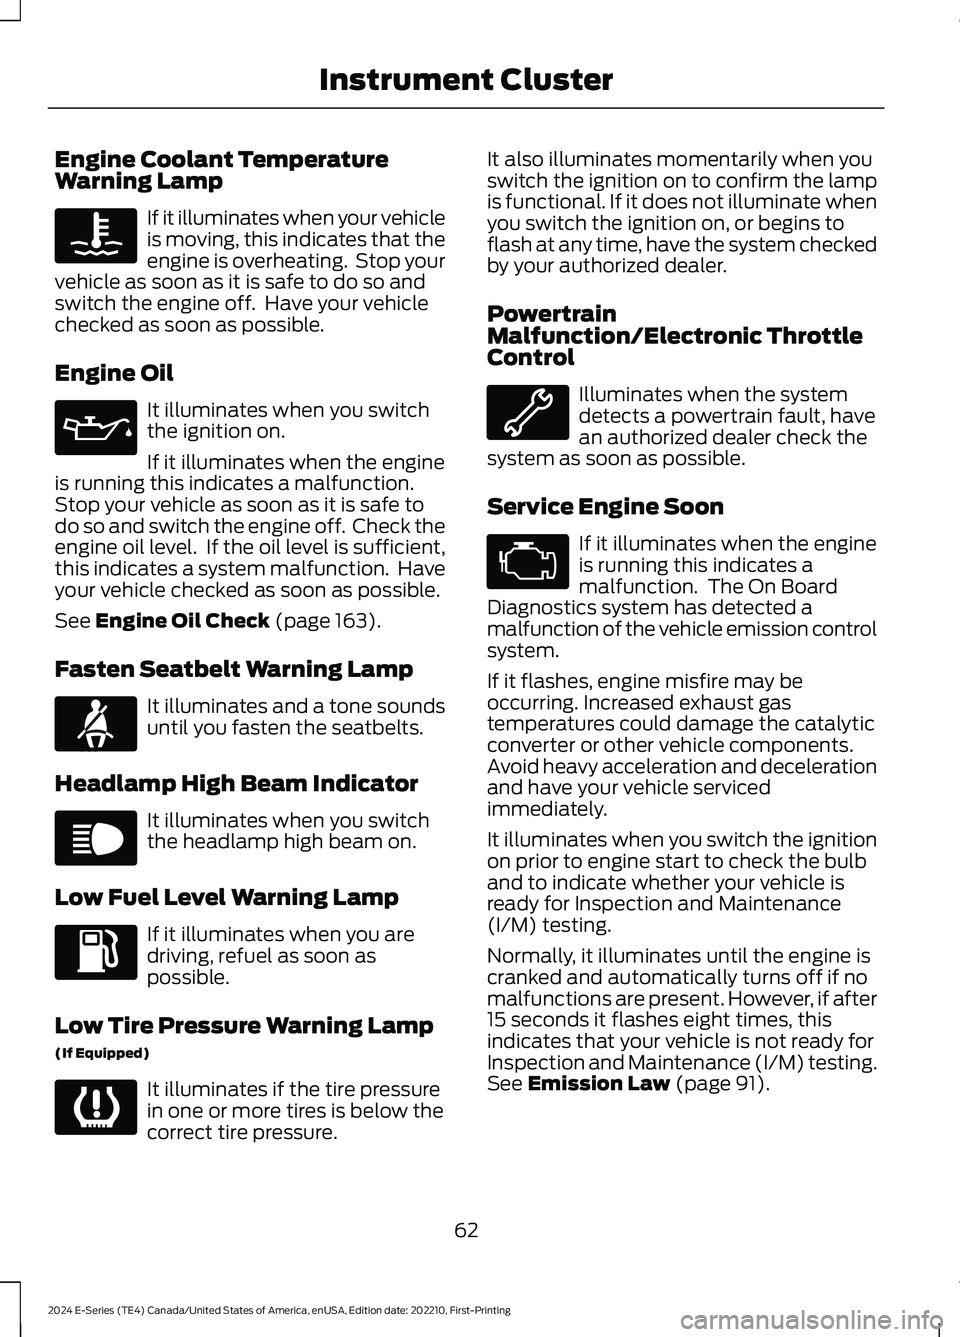 FORD E SERIES 2024  Owners Manual Engine Coolant TemperatureWarning Lamp
If it illuminates when your vehicleis moving, this indicates that theengine is overheating.  Stop yourvehicle as soon as it is safe to do so andswitch the engine